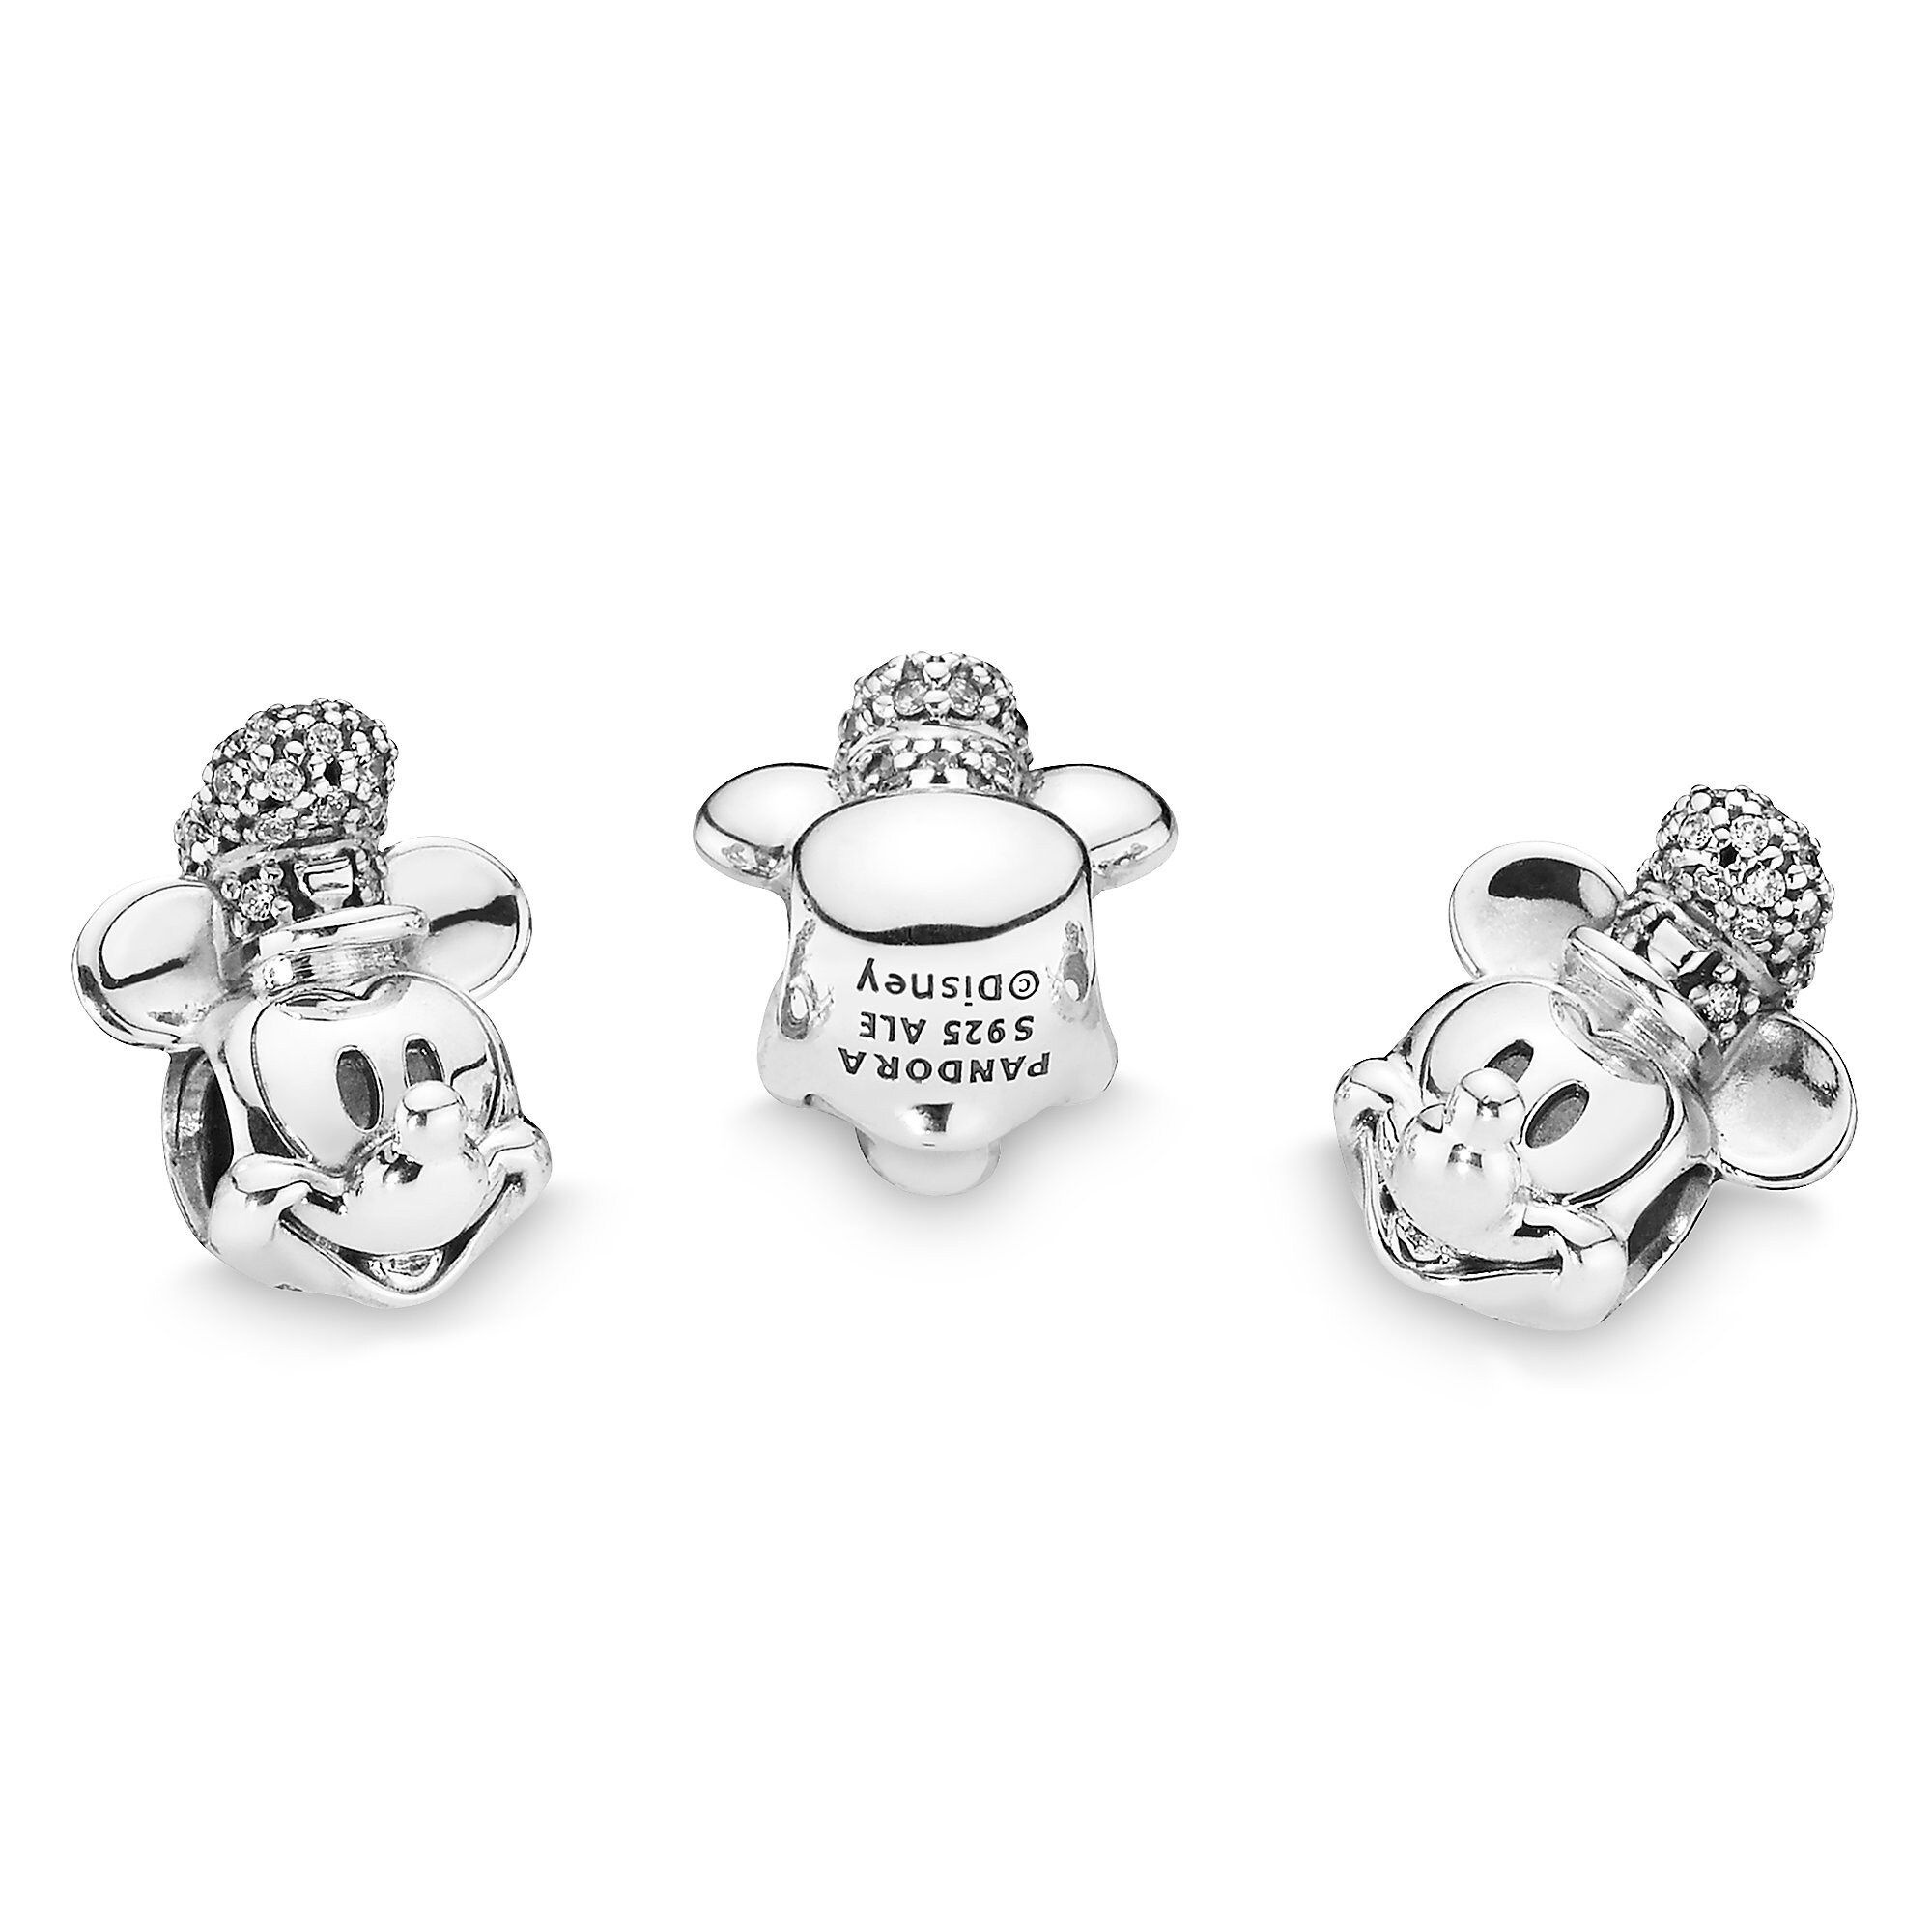 Mickey Mouse as Steamboat Willie Charm by Pandora Jewelry